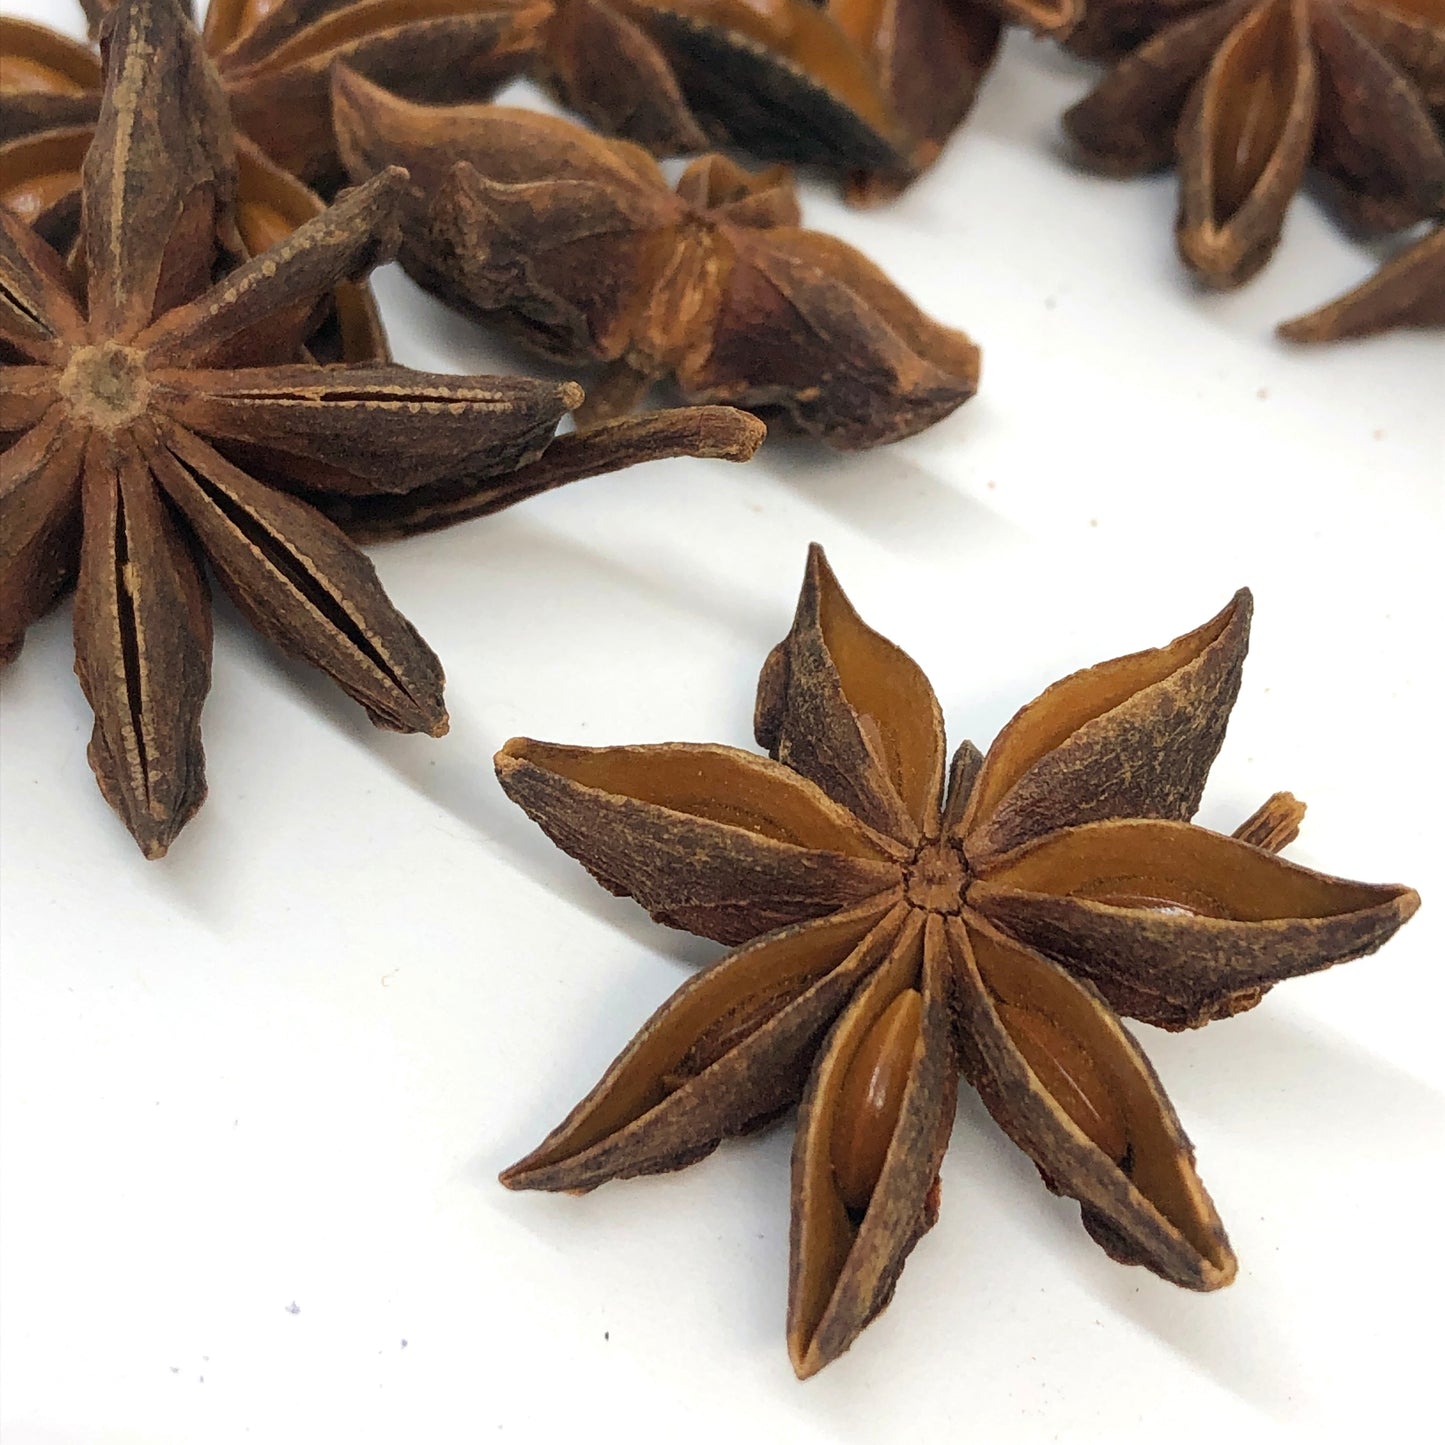 Star Anise, whole